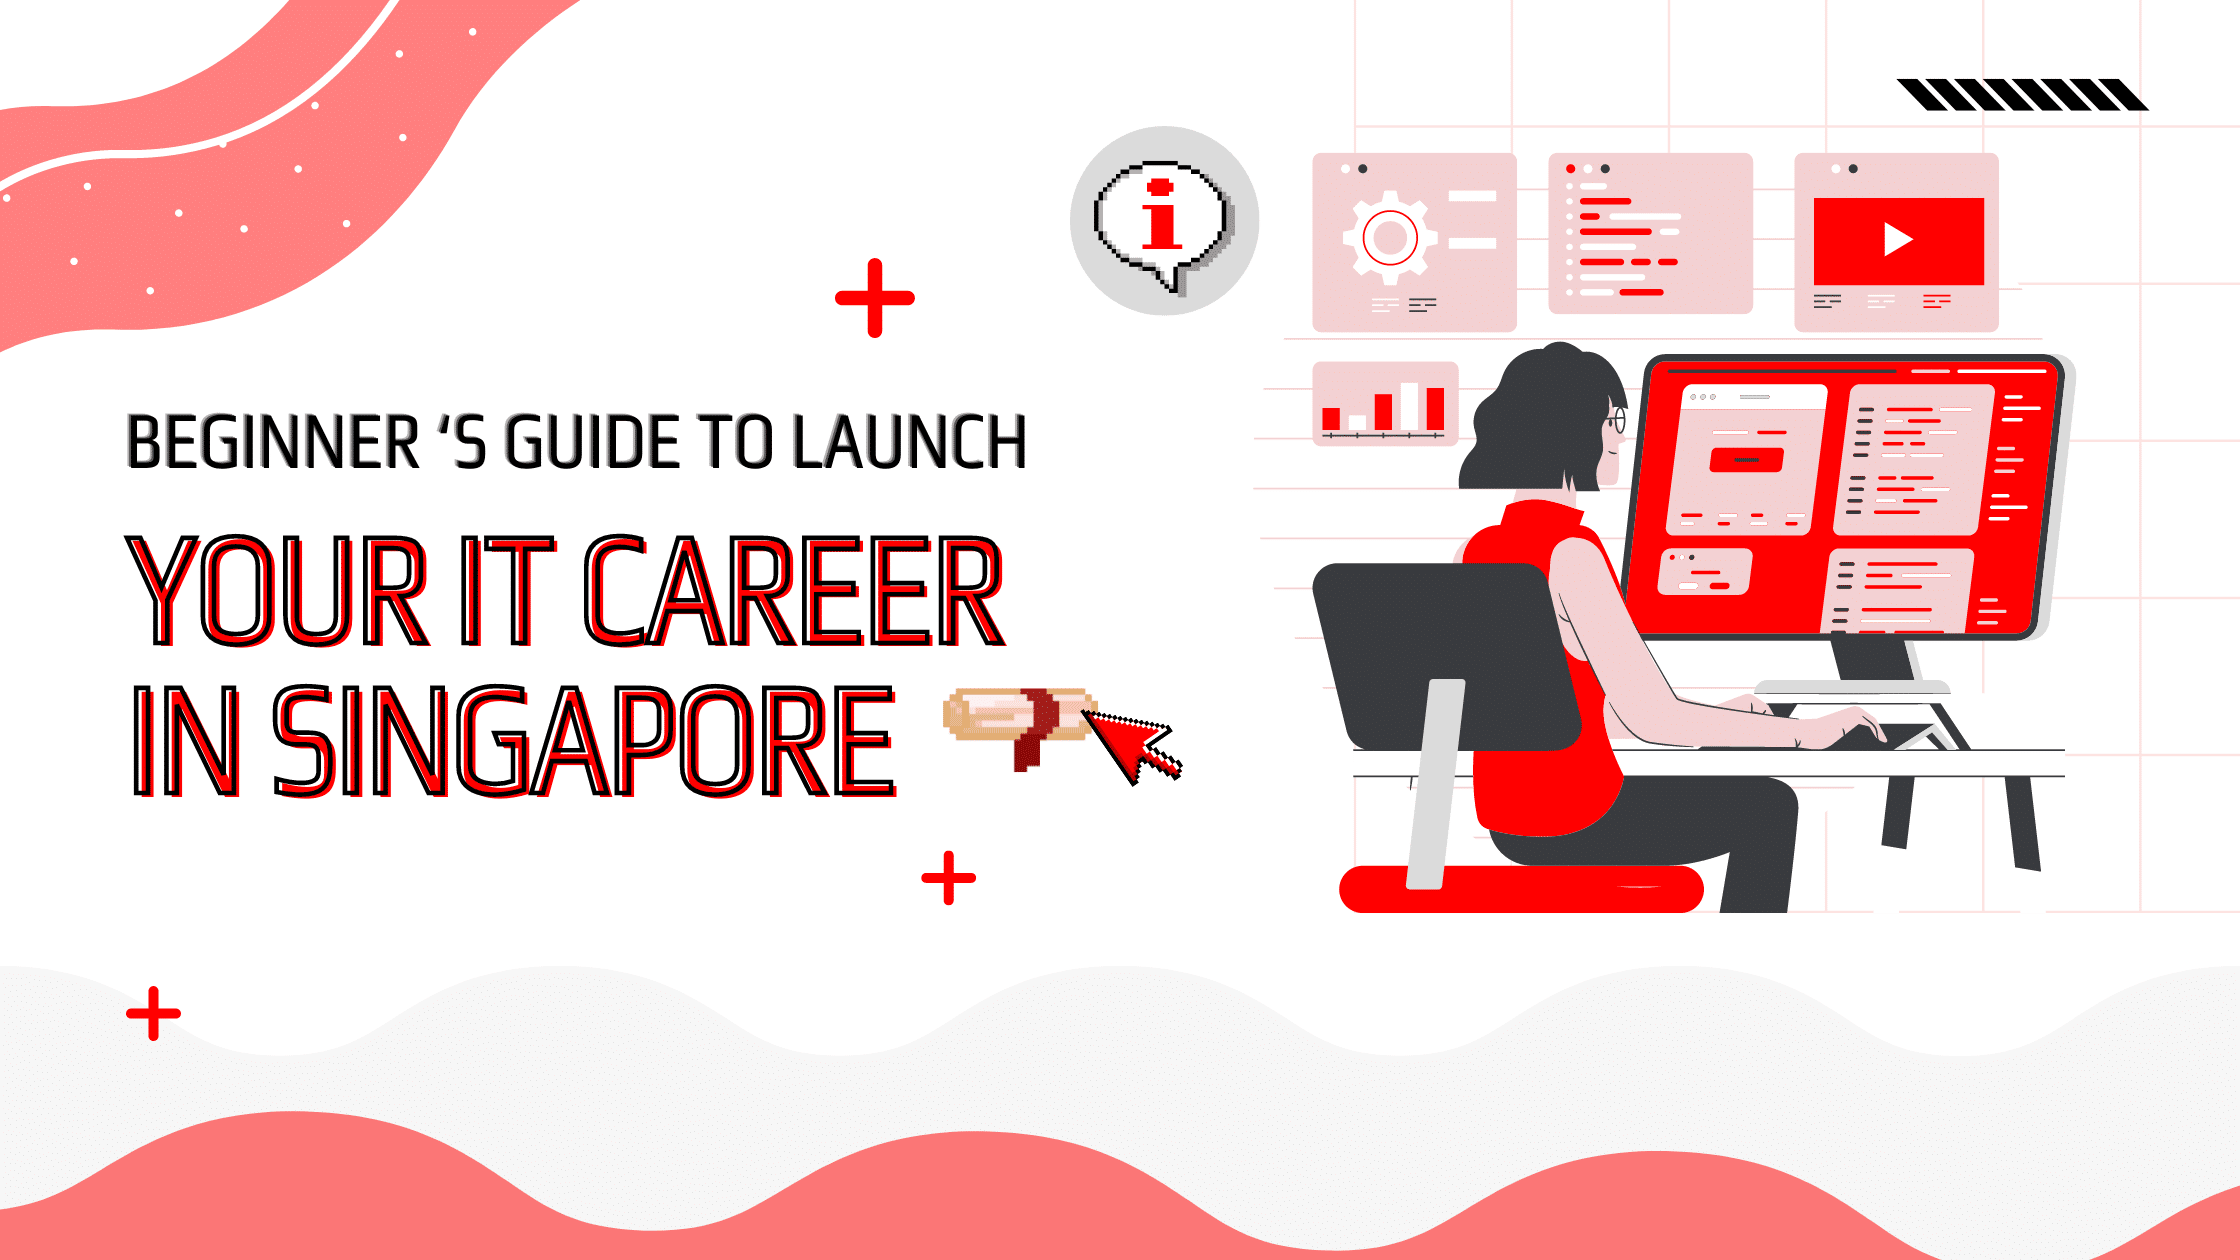 header image for IT career in Singapore with woman using desktop